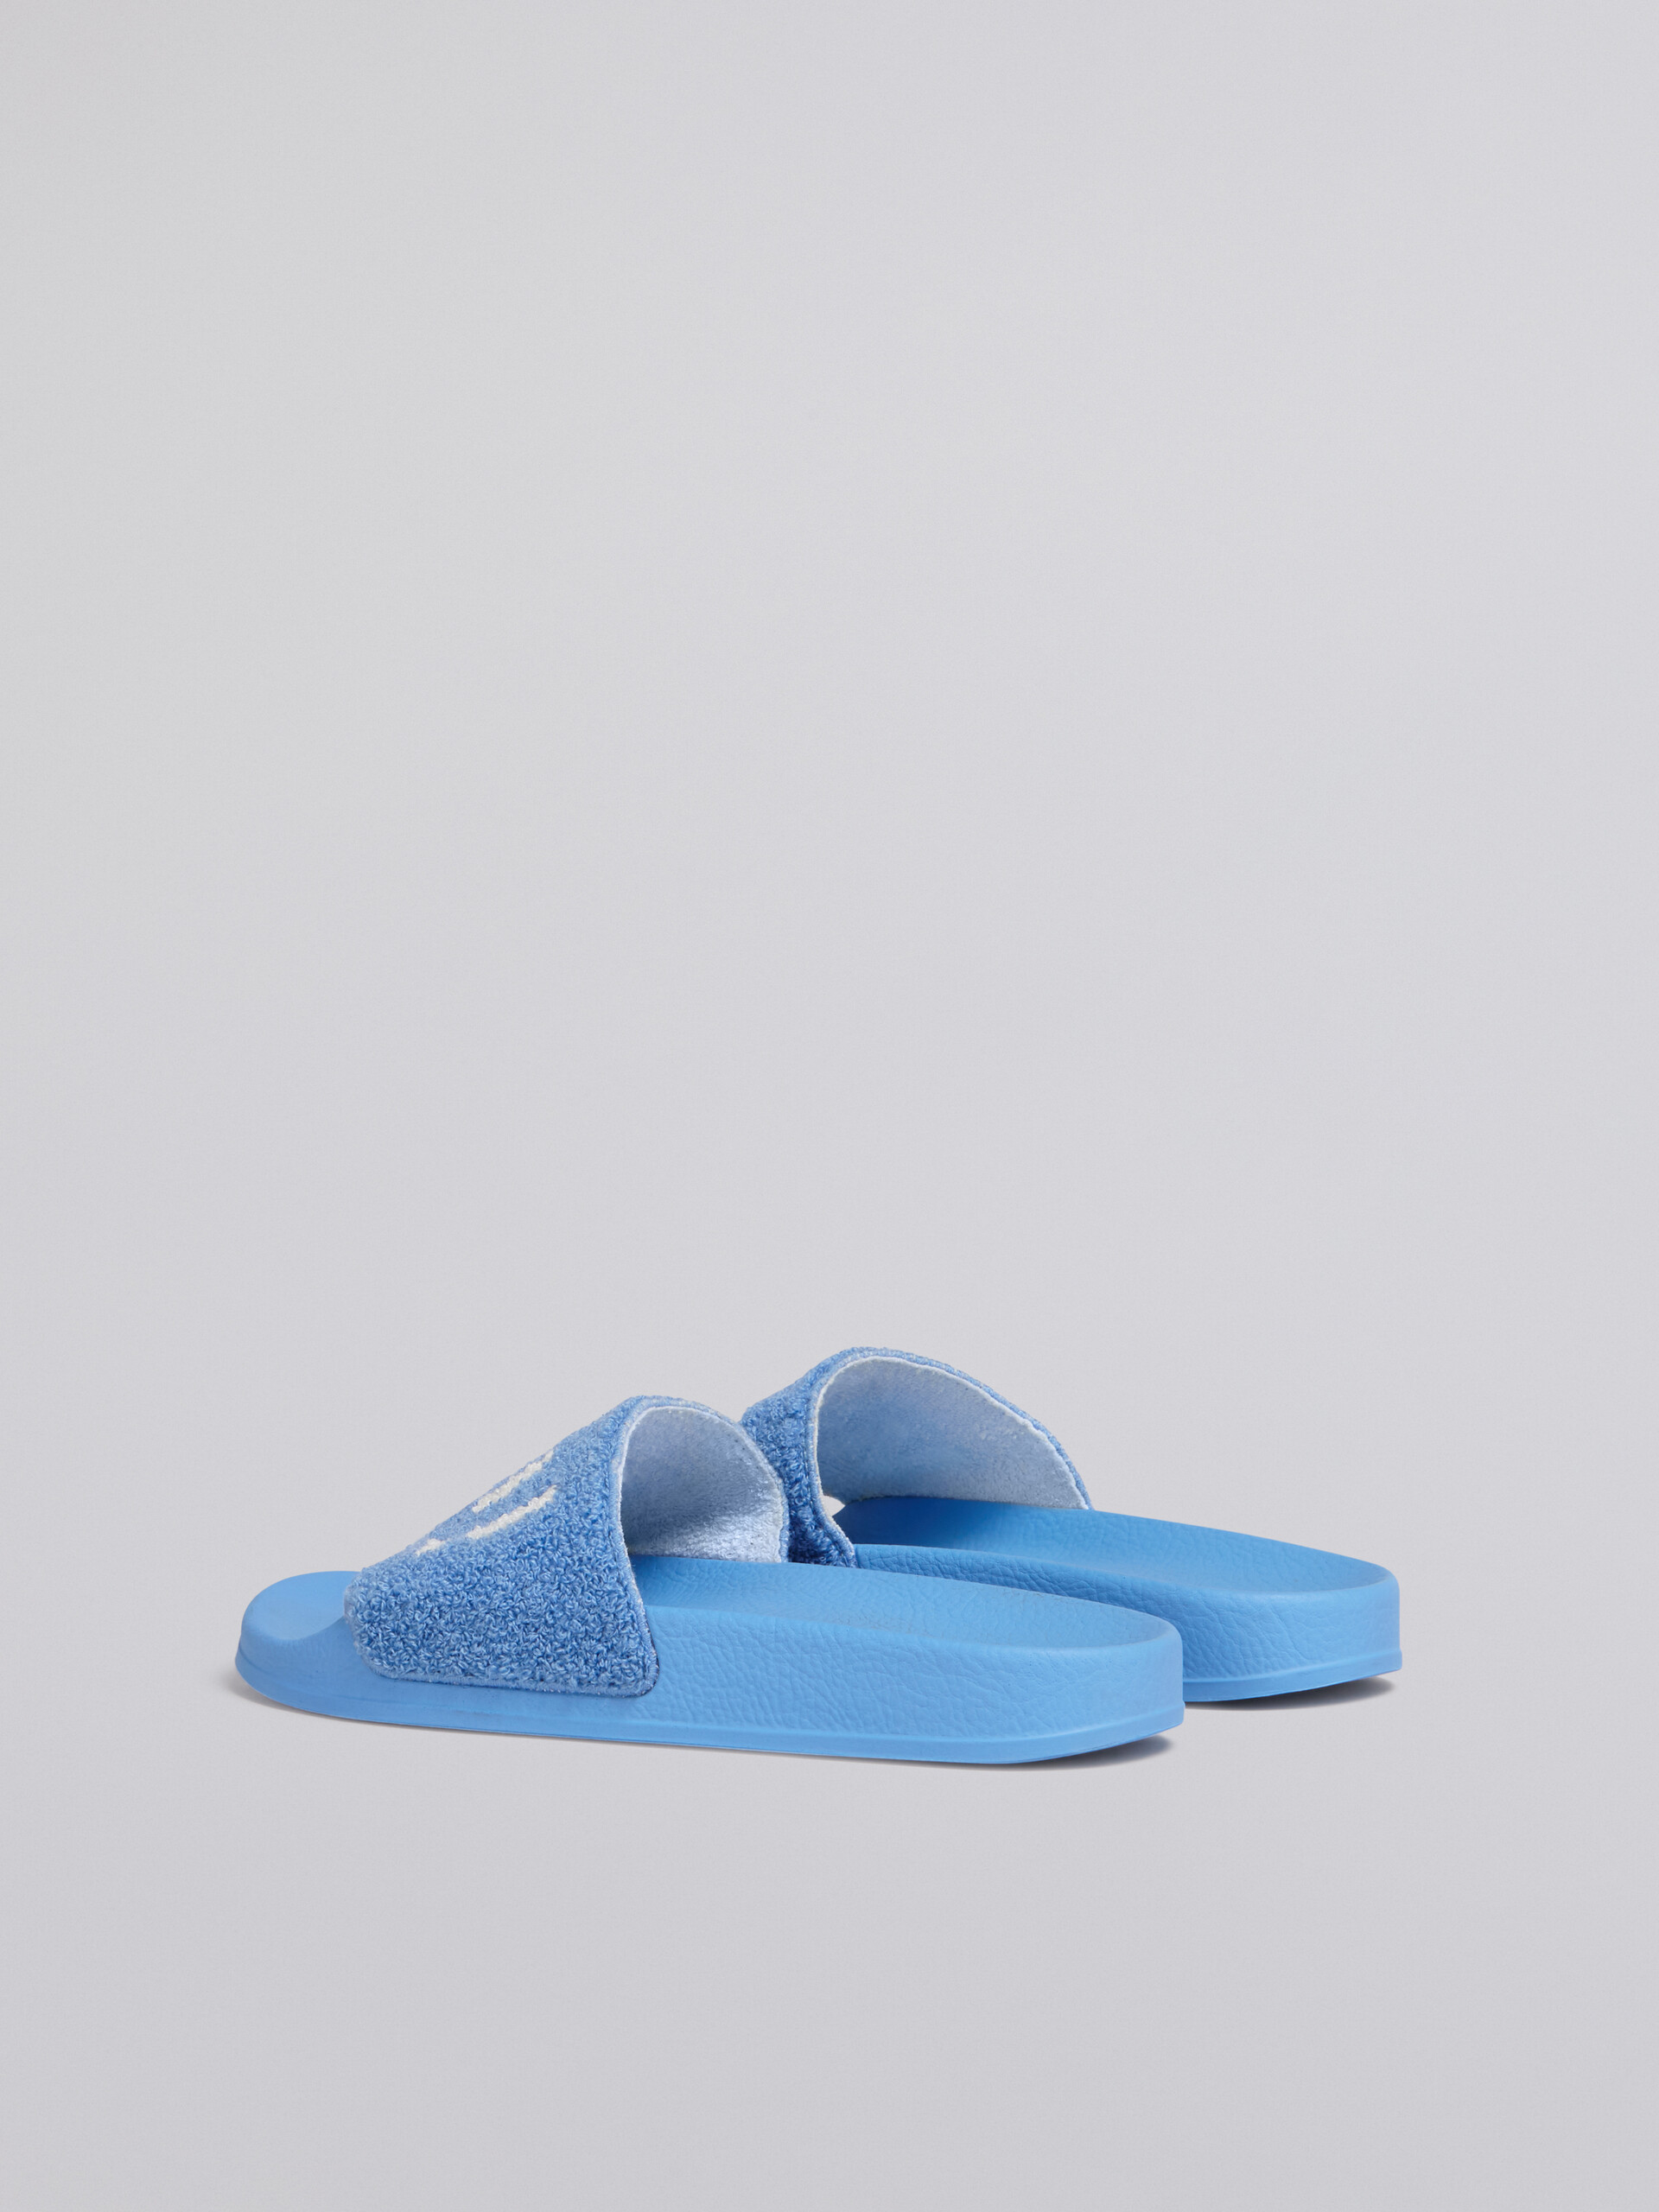 Rubber sandal with blue and white terry cloth upper - Sandals - Image 3